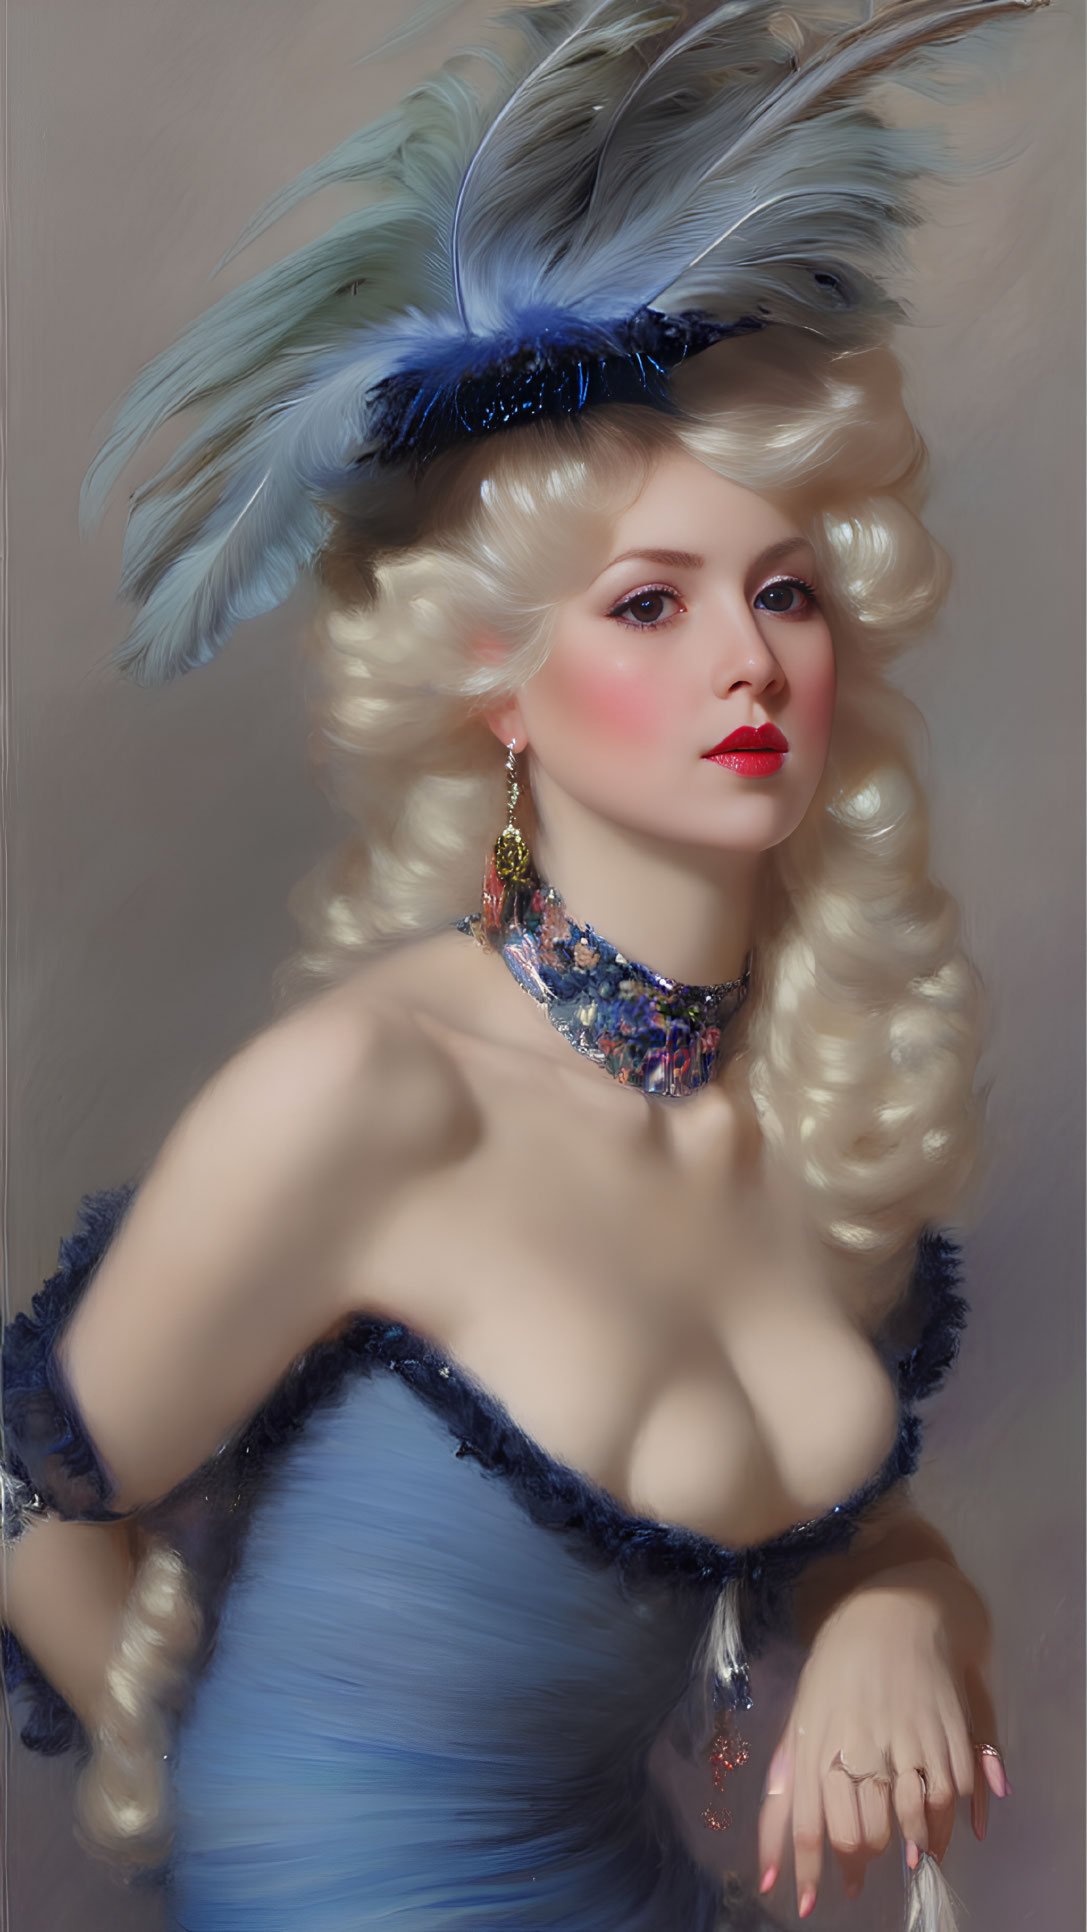 Blonde woman portrait with feathered hat, blue dress, and jewel necklace